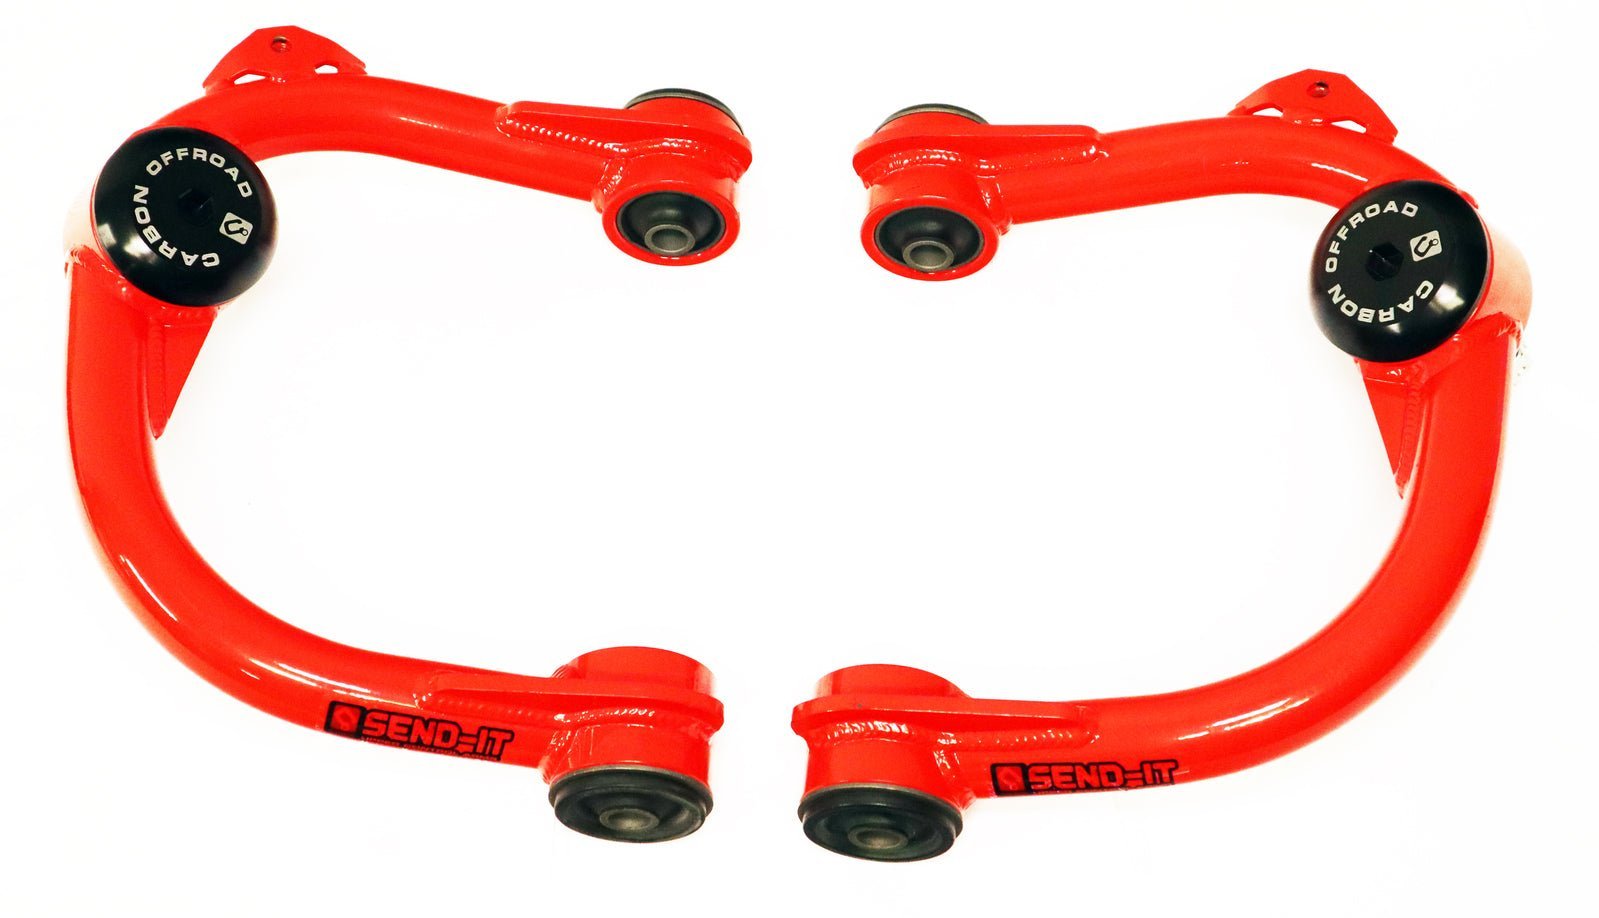 Carbon Offroad - Carbon Send - It UCA - Fits Toyota Hilux N80 Revo upper control arms - 4X4OC™ | 4x4 Offroad Centre